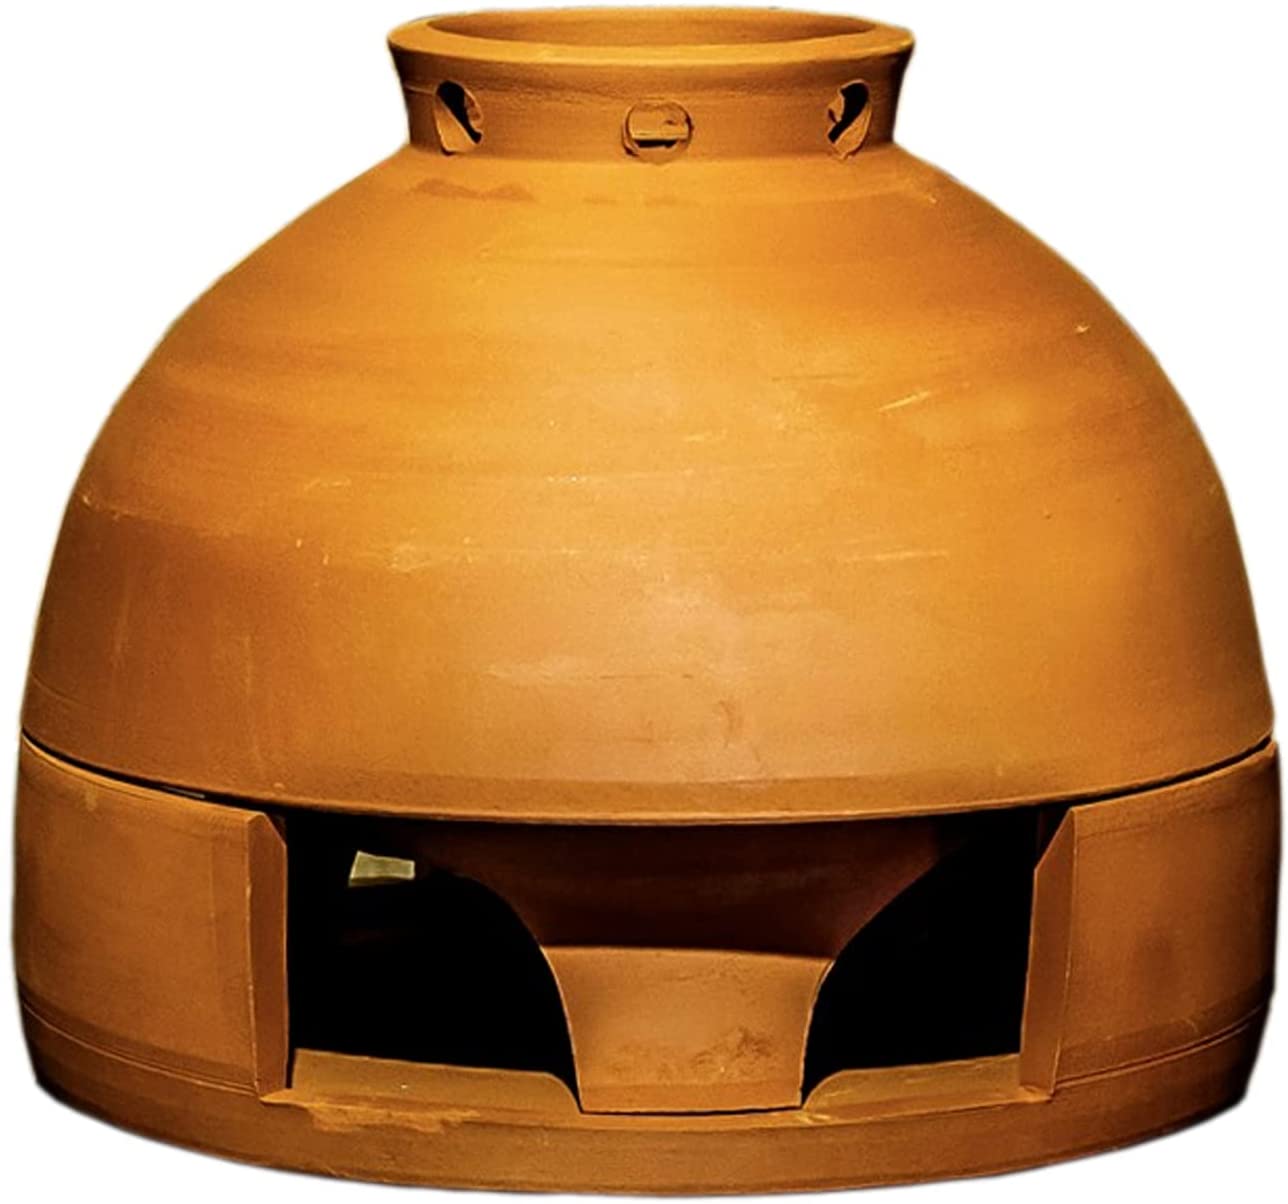 https://www.wideopencountry.com/wp-content/uploads/sites/4/2021/09/Pottery-Candle-StoveTerracotta-Candle-Heater-Farmhouse-Stove-Pots-Clay-Candle-House.jpg?resize=1288%2C1204